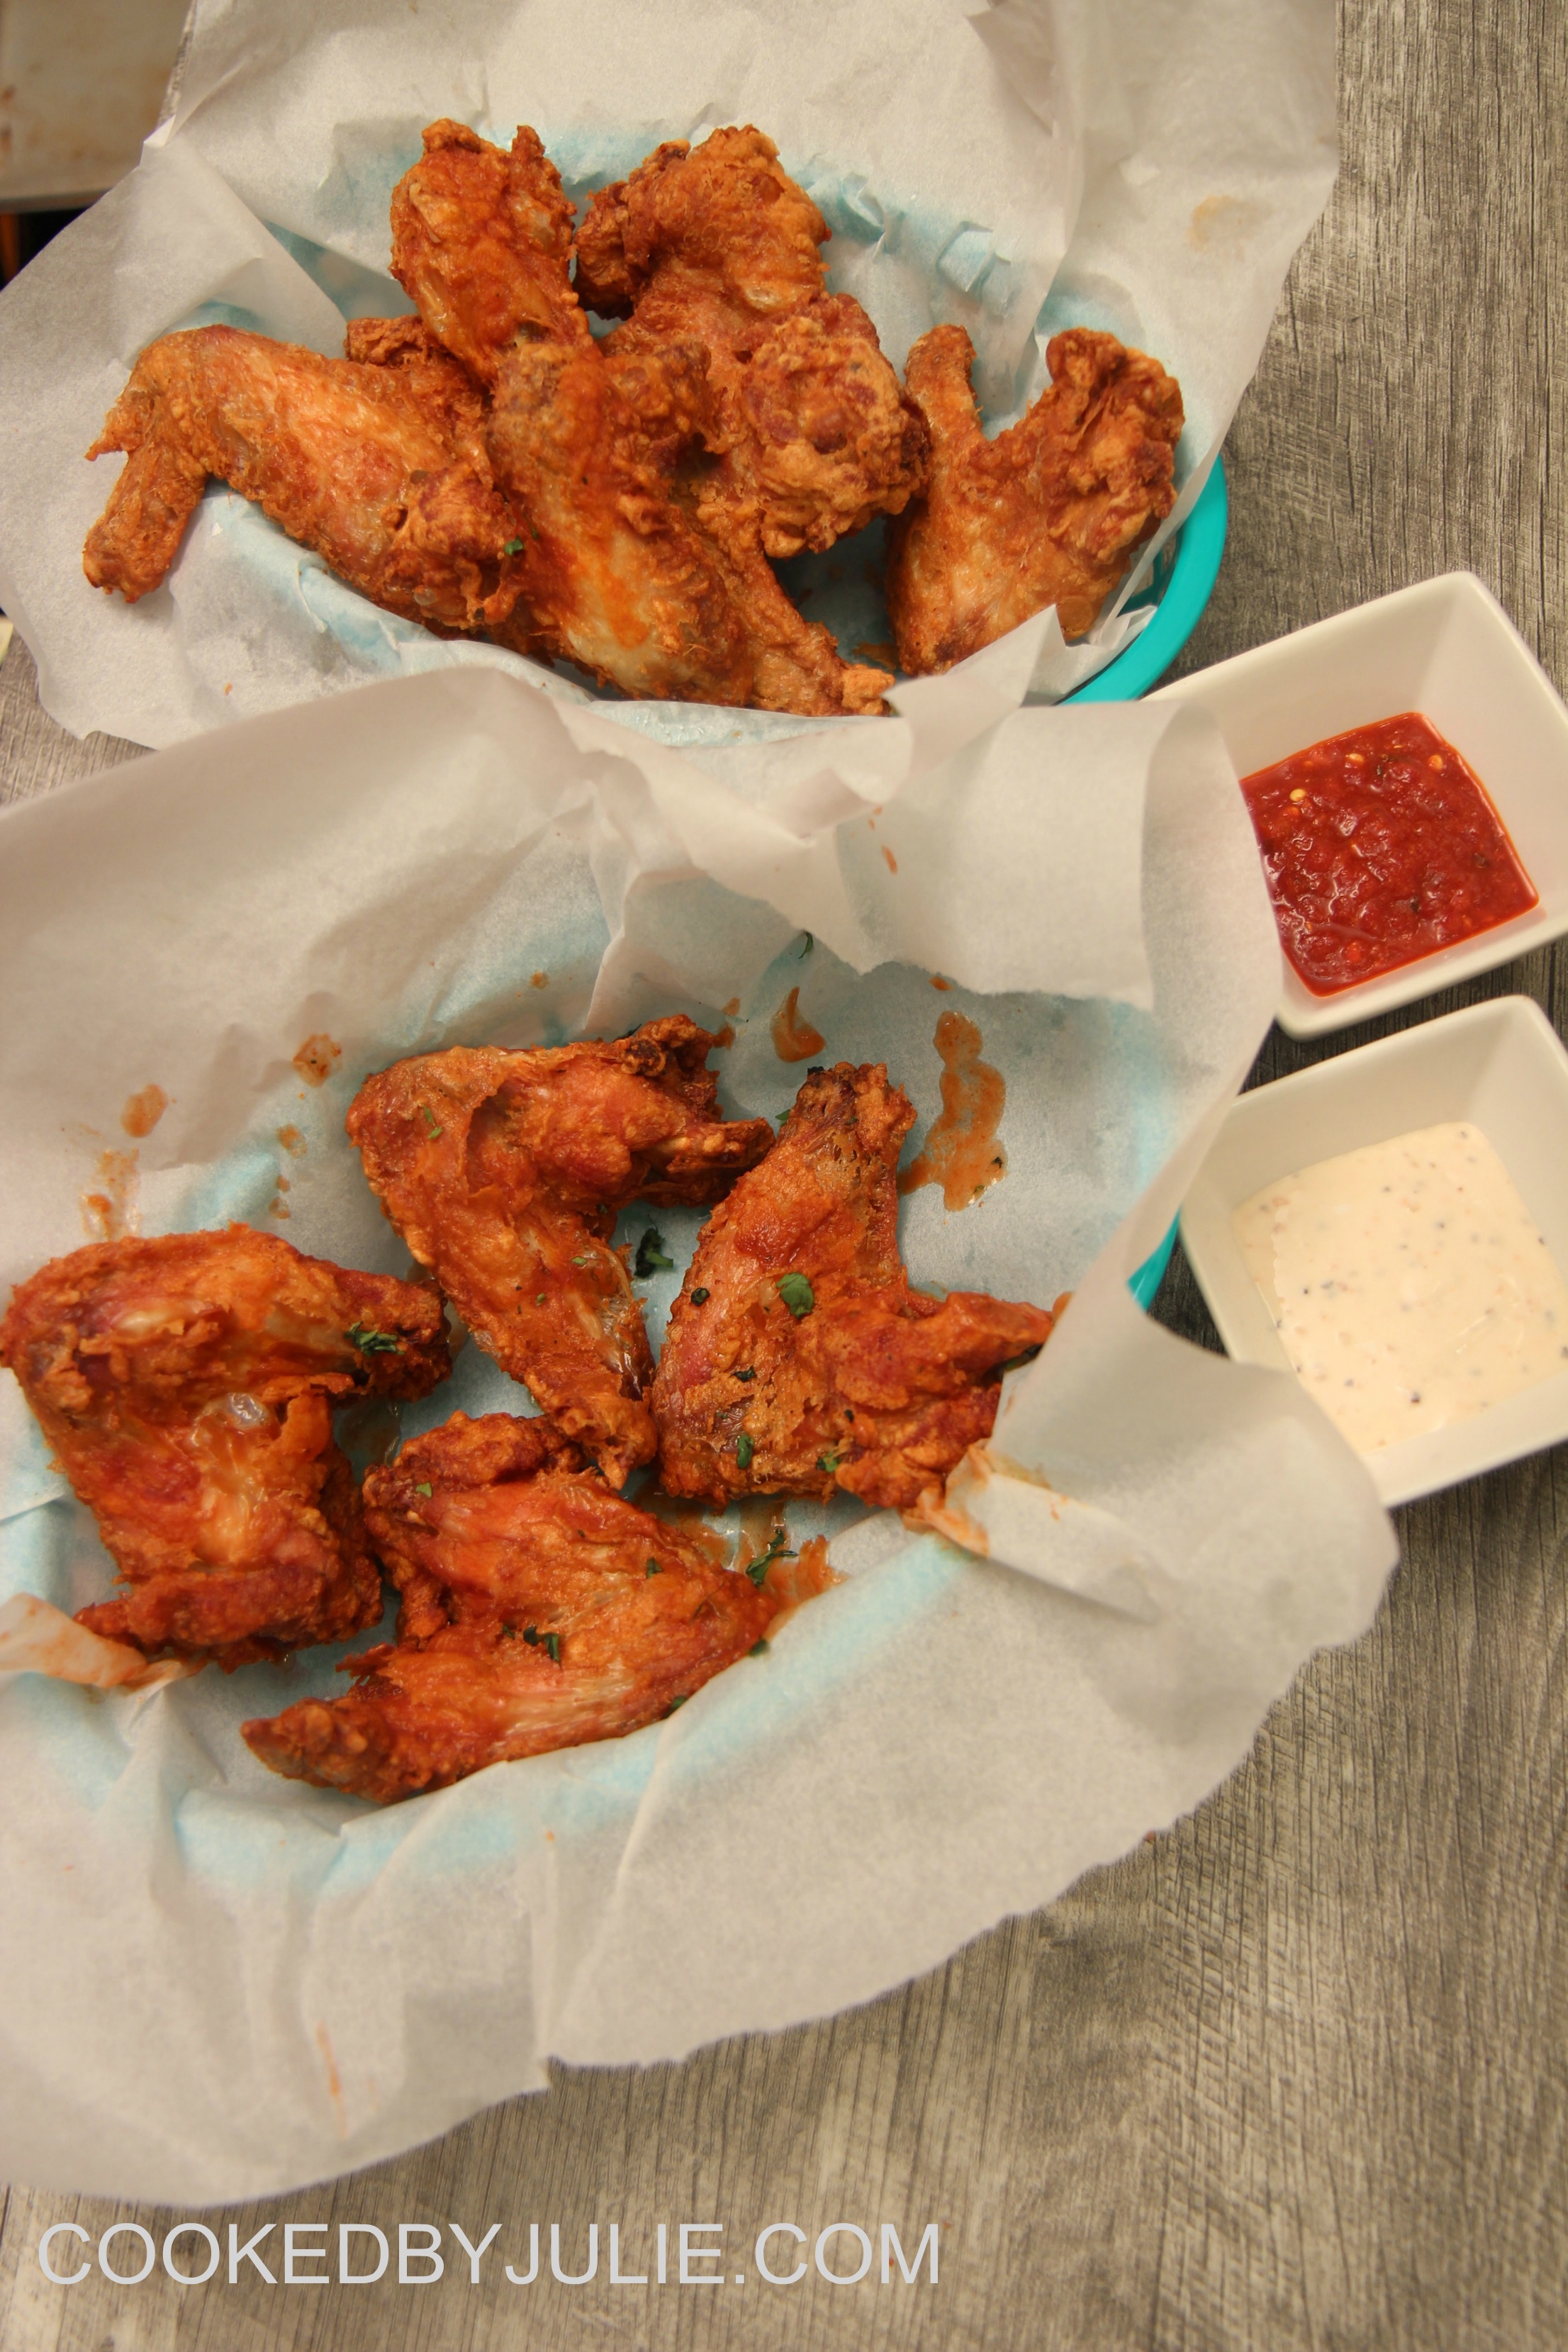 Hot sauce and blu cheese give you some variety with these wings